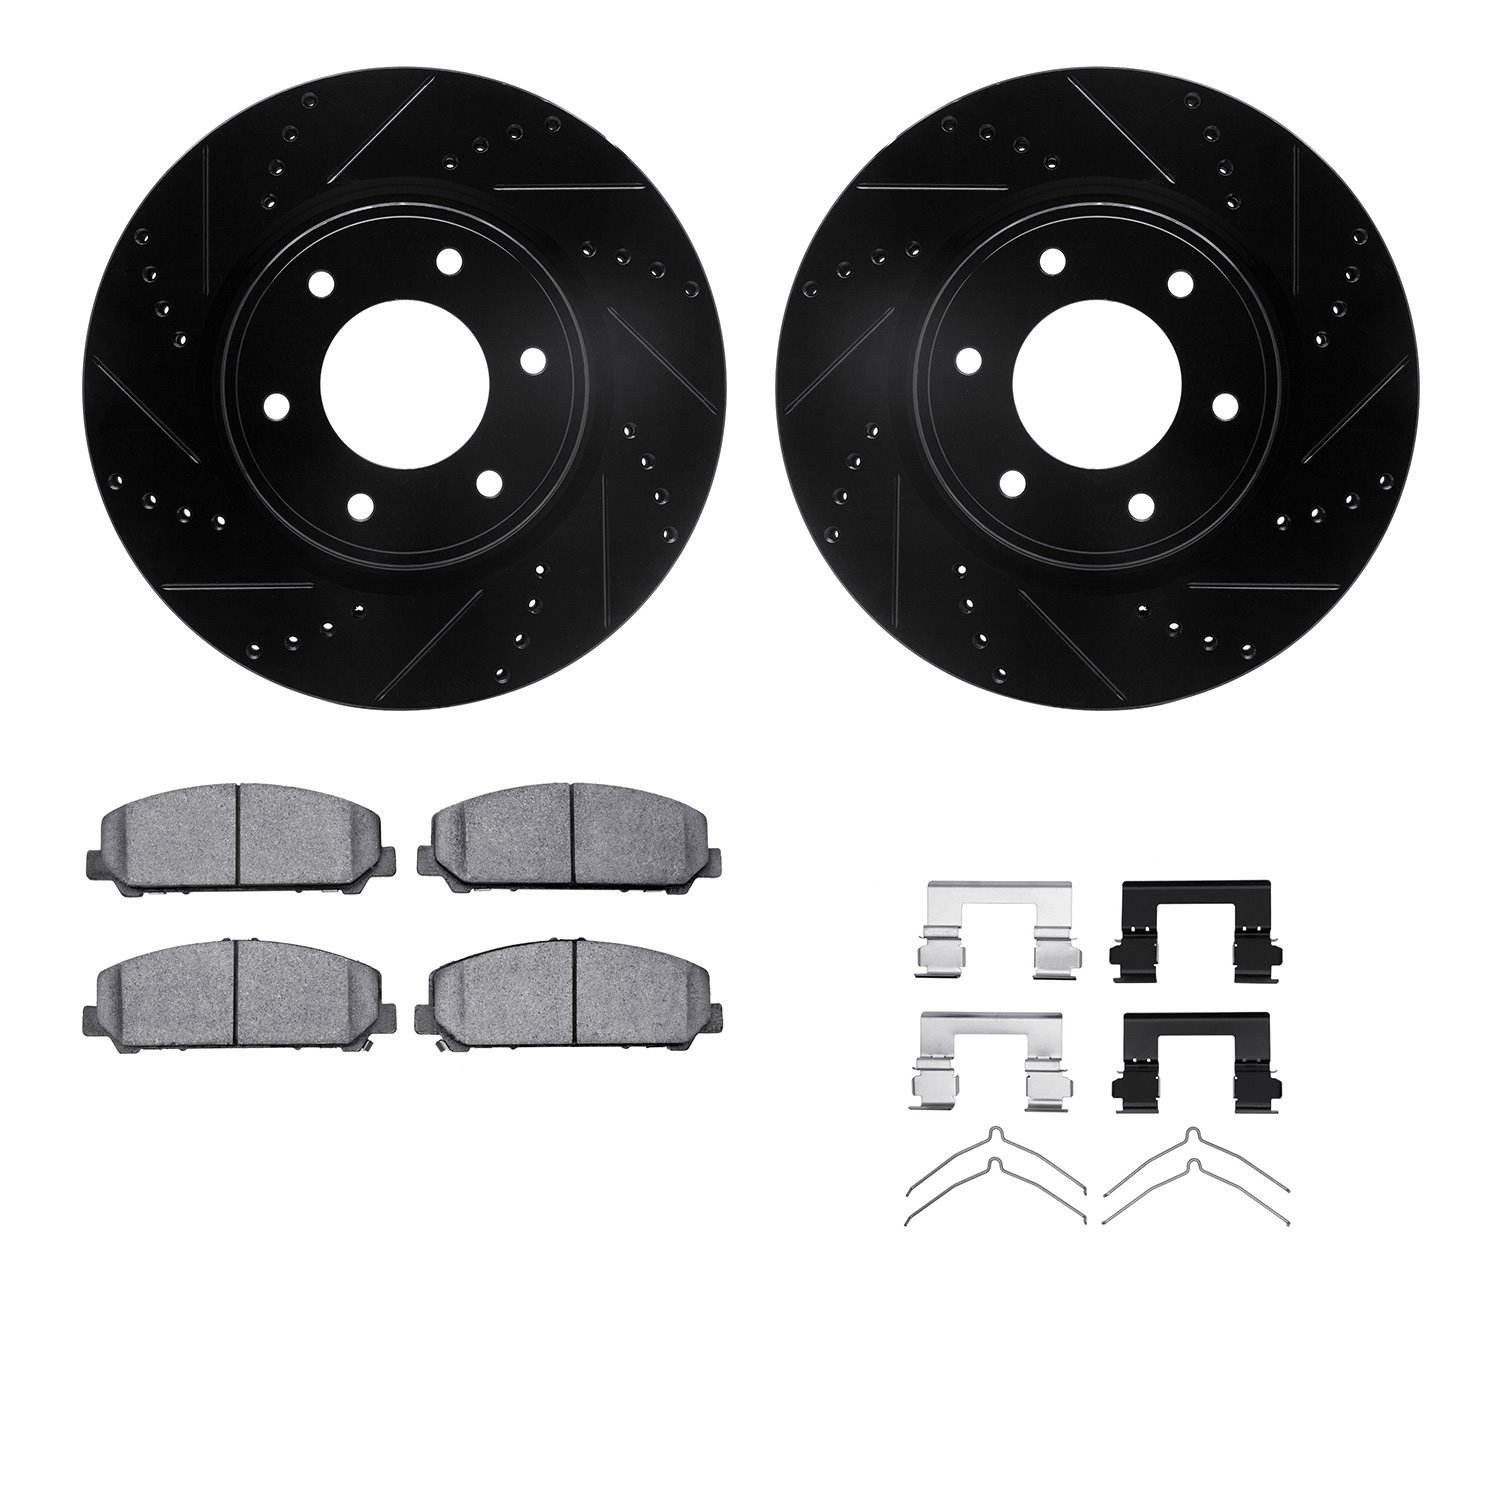 8412-67005 Drilled/Slotted Brake Rotors with Ultimate-Duty Brake Pads Kit & Hardware [Black], Fits Select Infiniti/Nissan, Posit